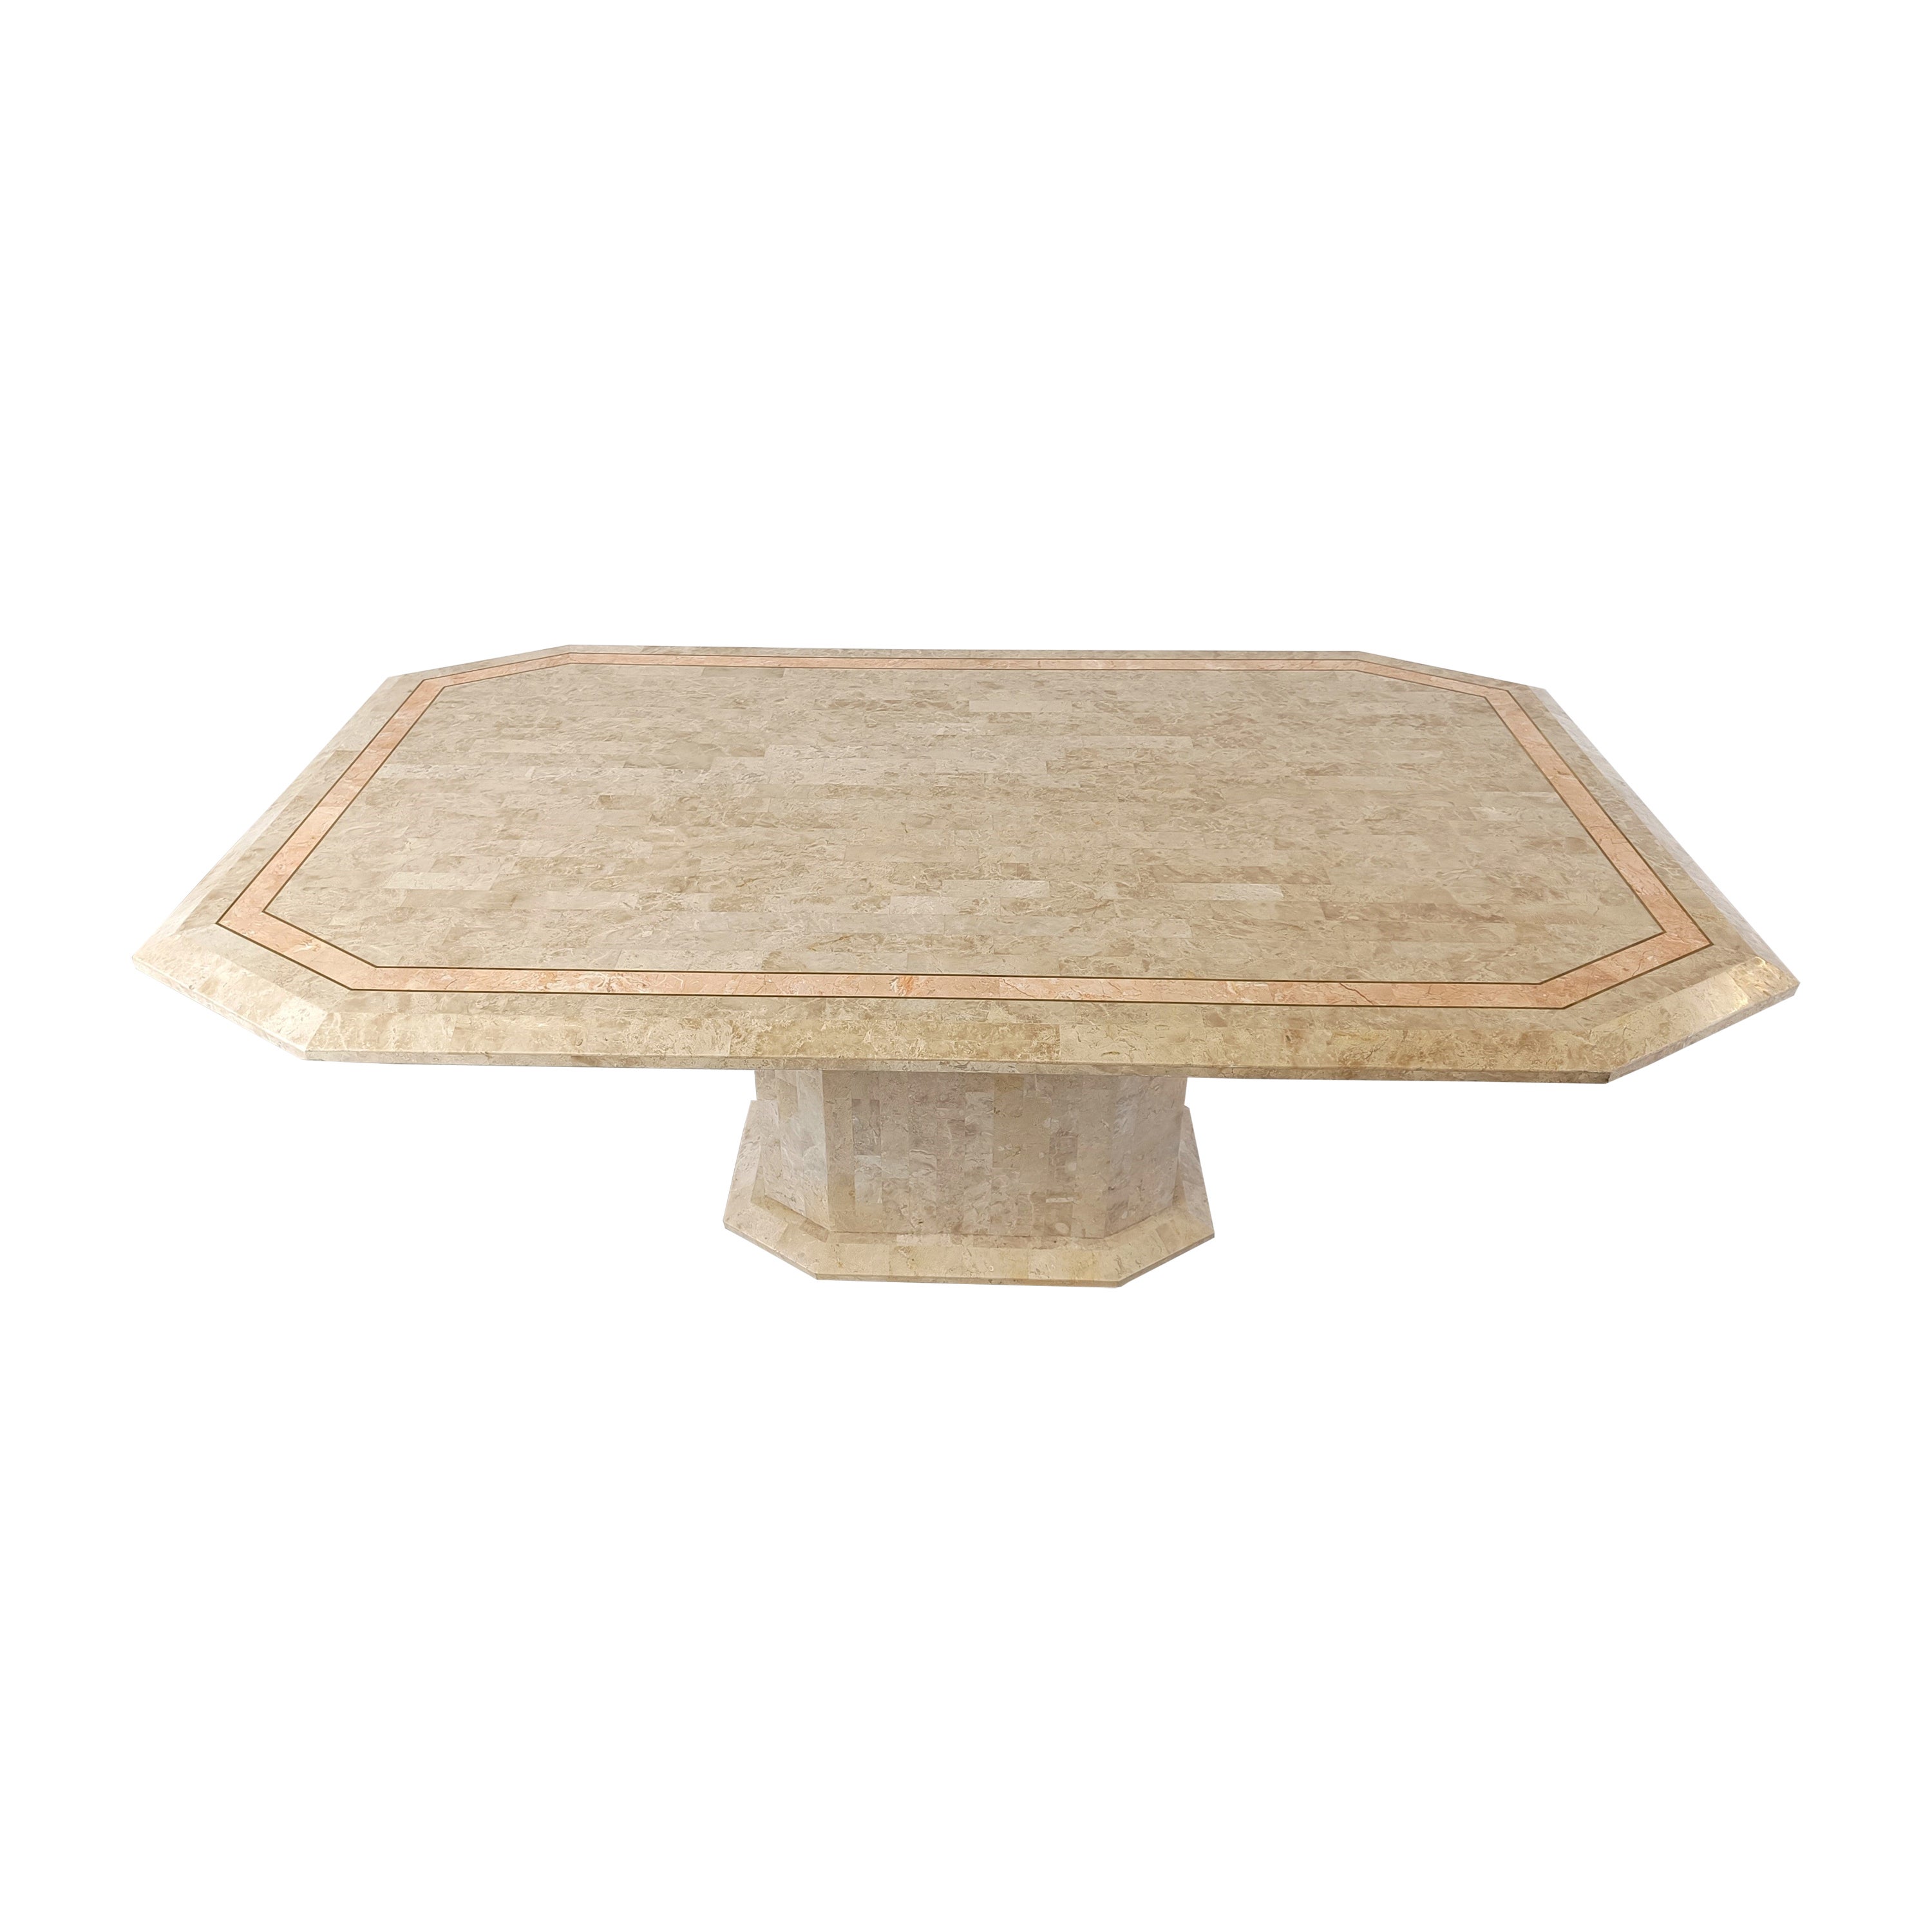 Vintage tesselated stone dining table by Maithland smith, 1970s For Sale